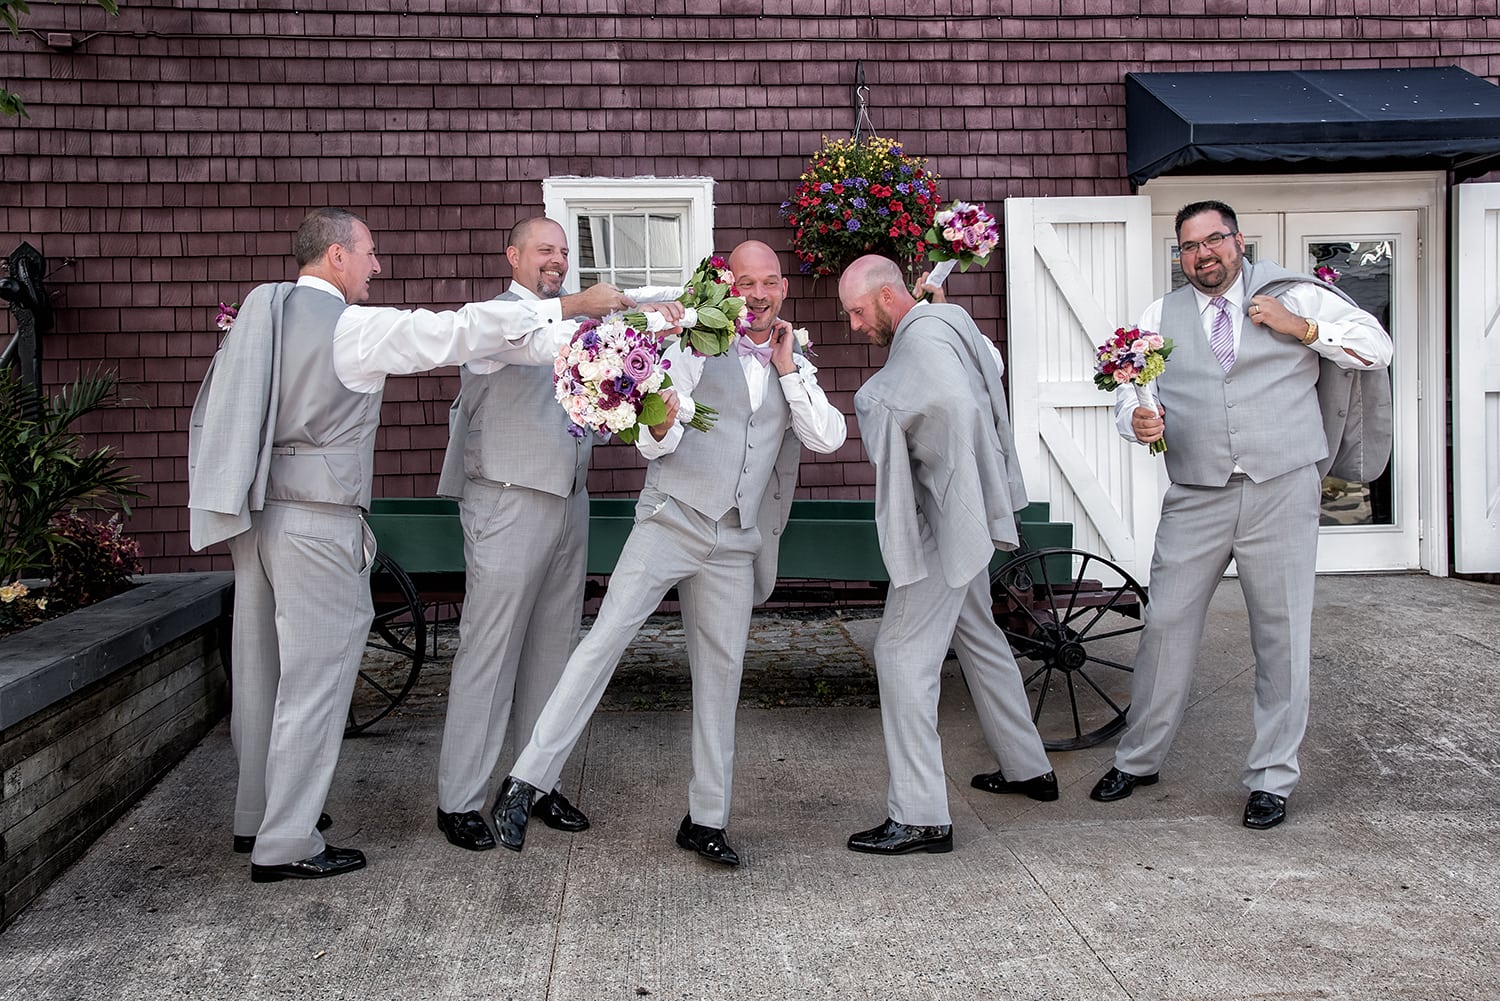 A groom with groomsmen hitting each other with the bridal bouquets at the Historic Properties in Halifax during wedding photos.